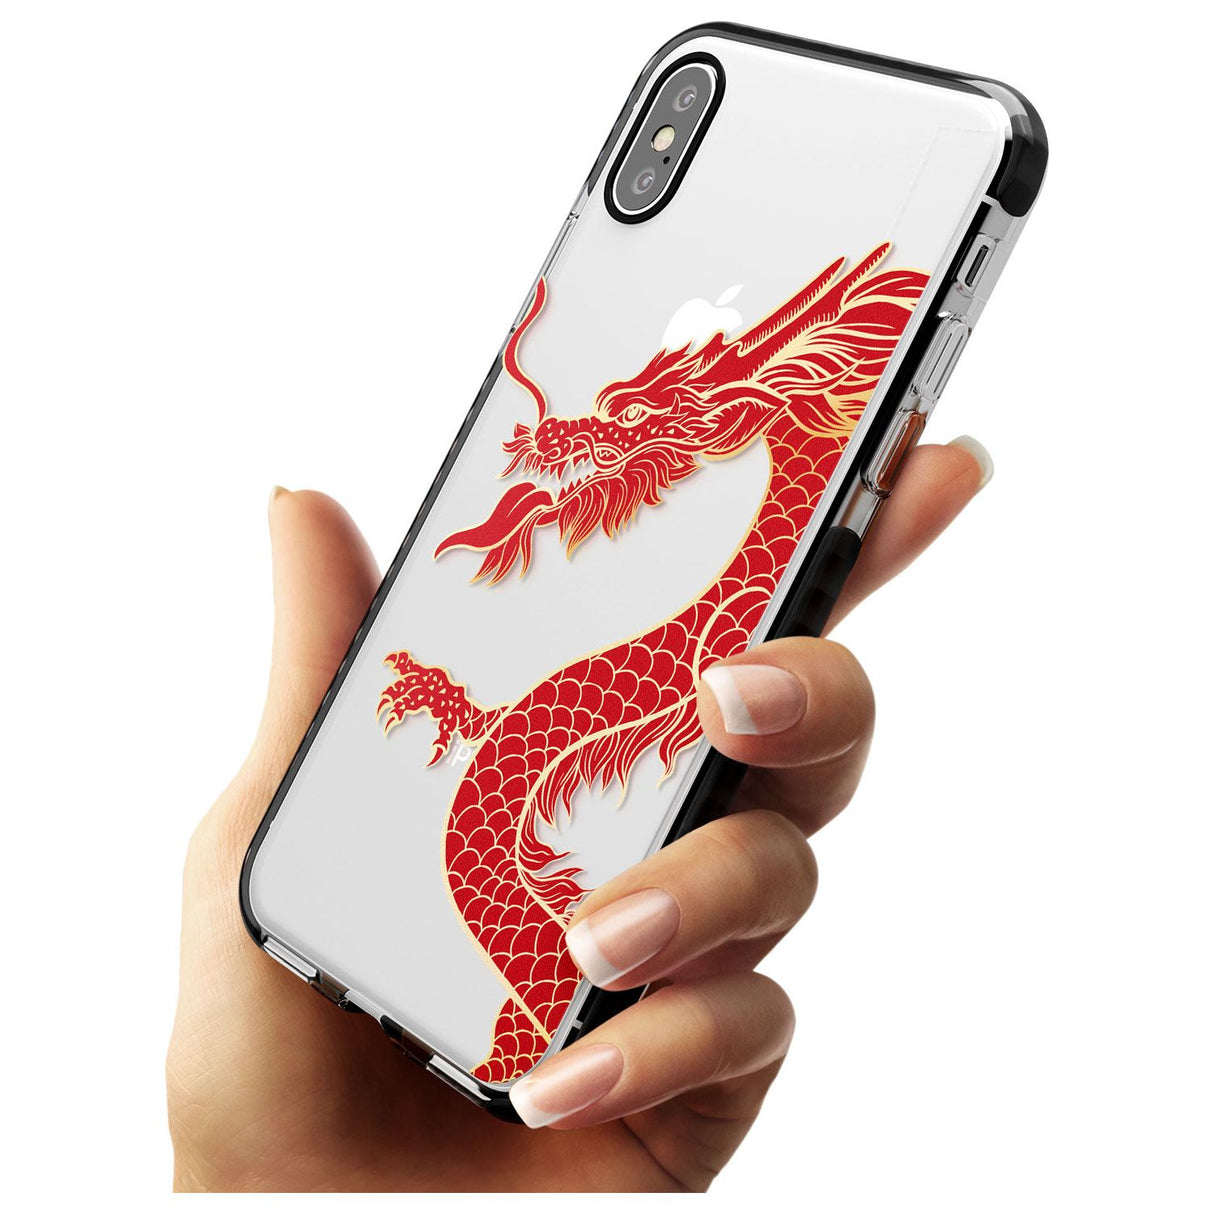 Large Black Dragon Black Impact Phone Case for iPhone X XS Max XR